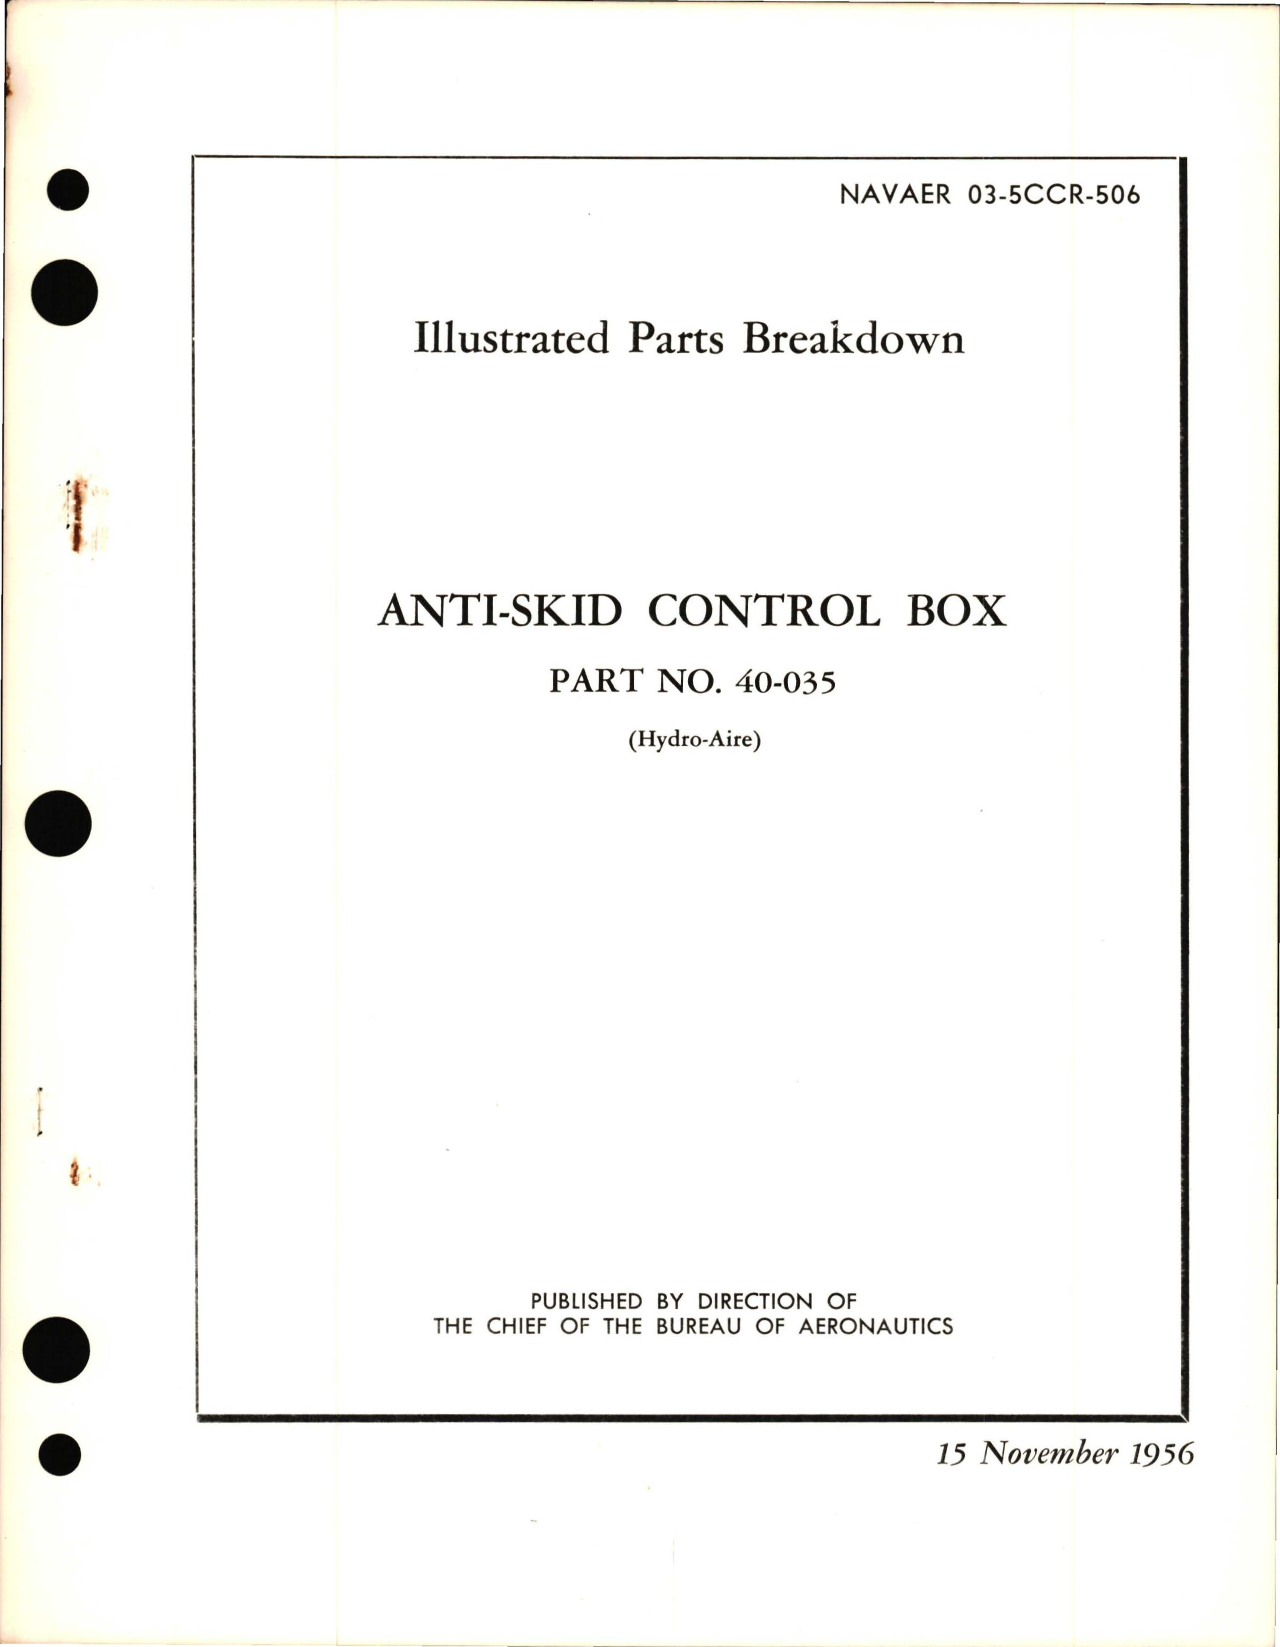 Sample page 1 from AirCorps Library document: Illustrated Parts Breakdown for Anti-Skid Control Box - Part 40-035